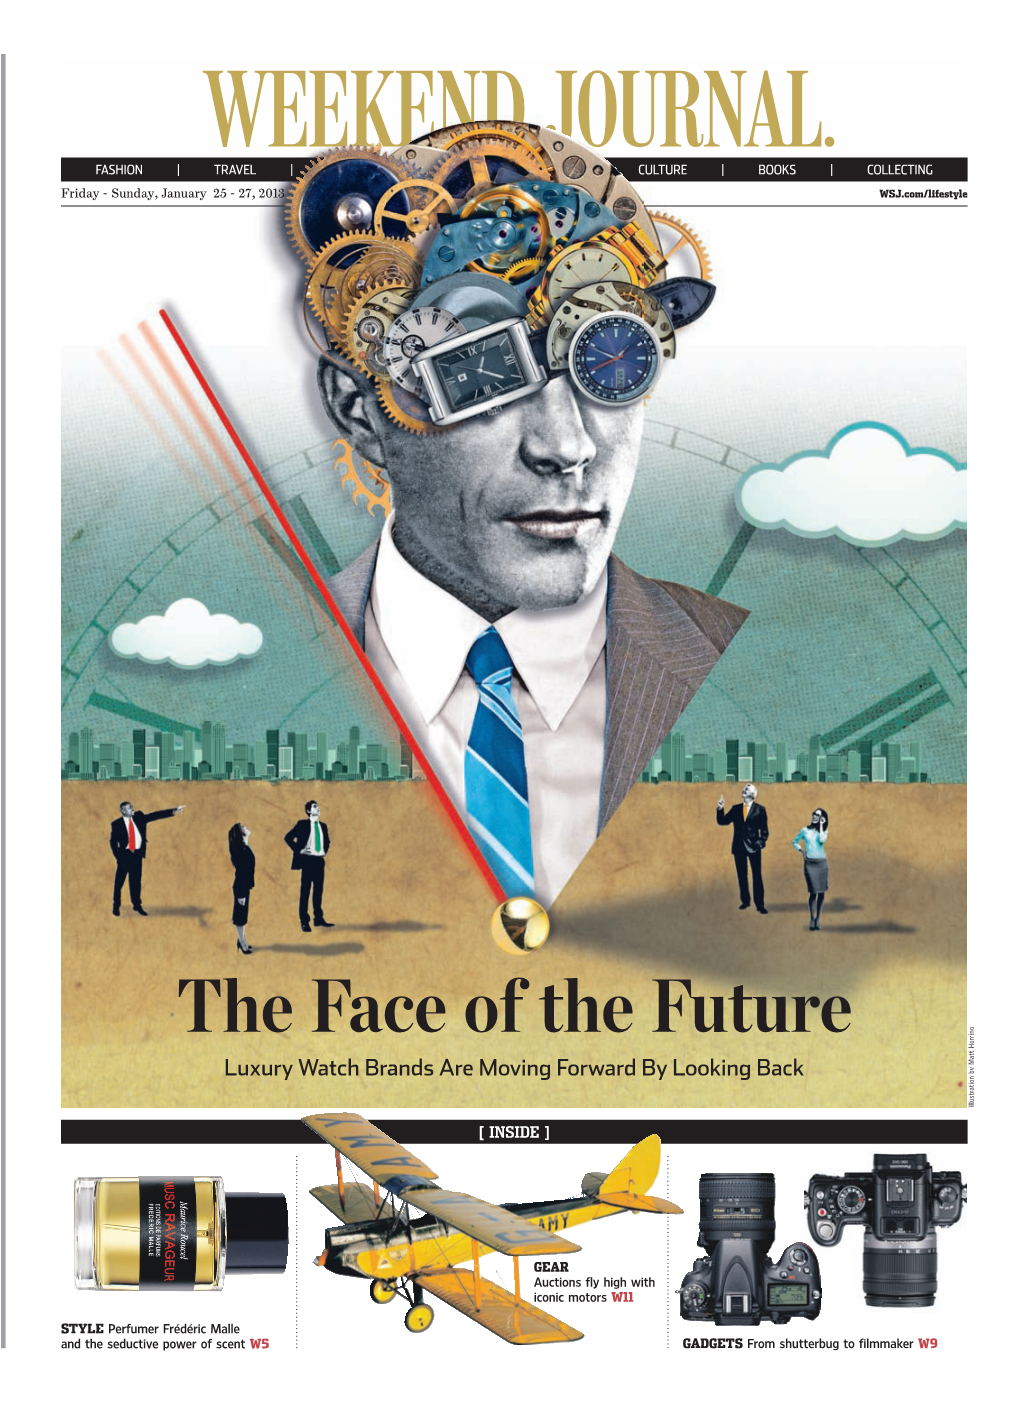 The Face of the Future Luxury Watch Brands Are Moving Forward by Looking Back Illustration by Matt Herring